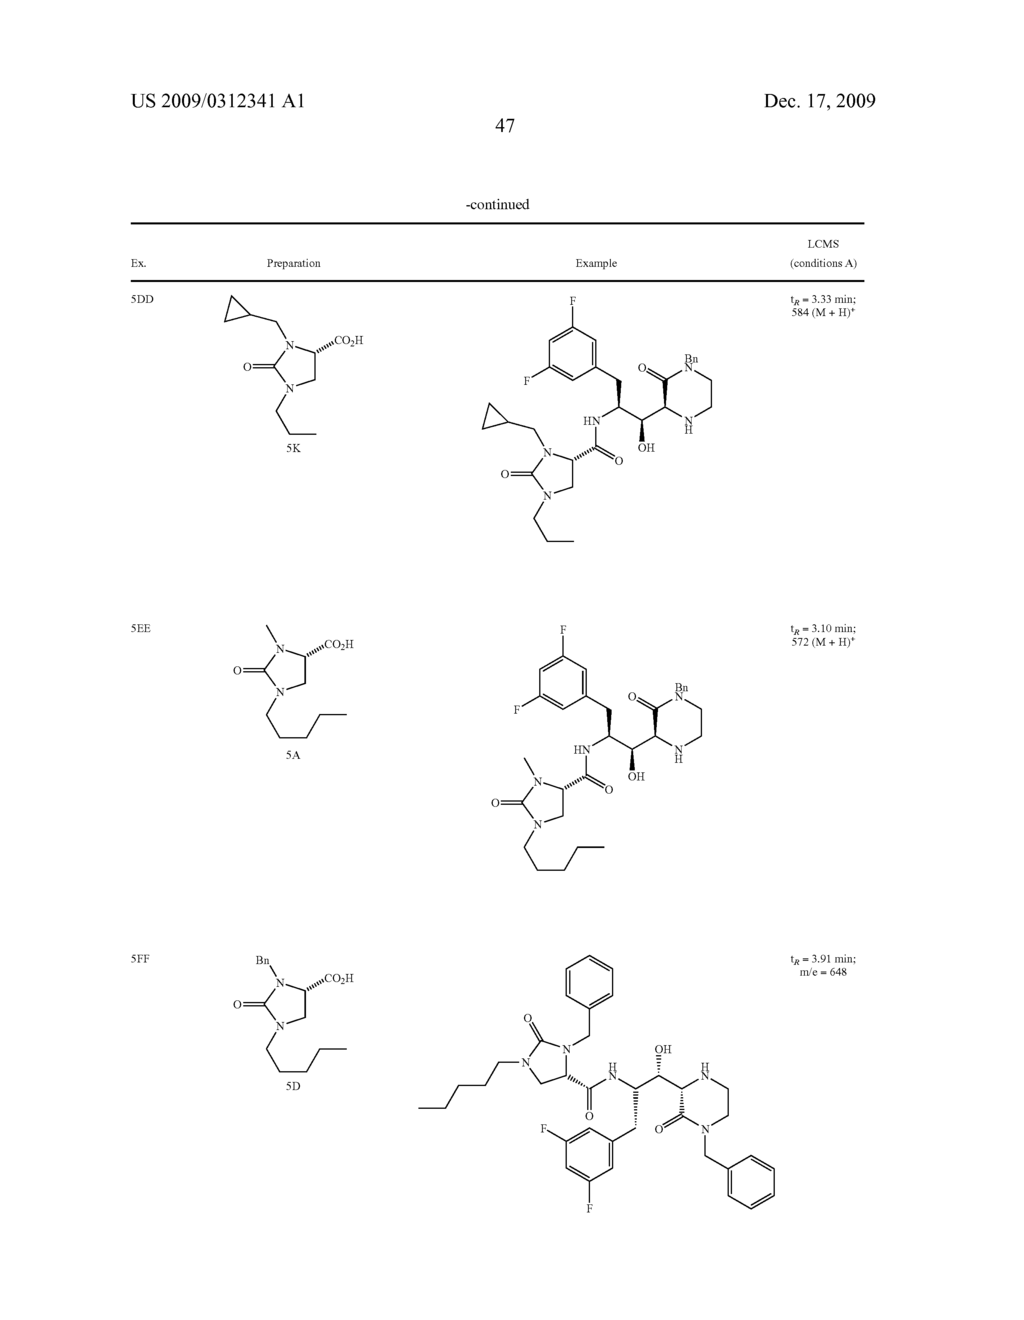 CYCLIC AMINE BACE-1 INHIBITORS HAVING A HETEROCYCLIC SUBSTITUENT - diagram, schematic, and image 48